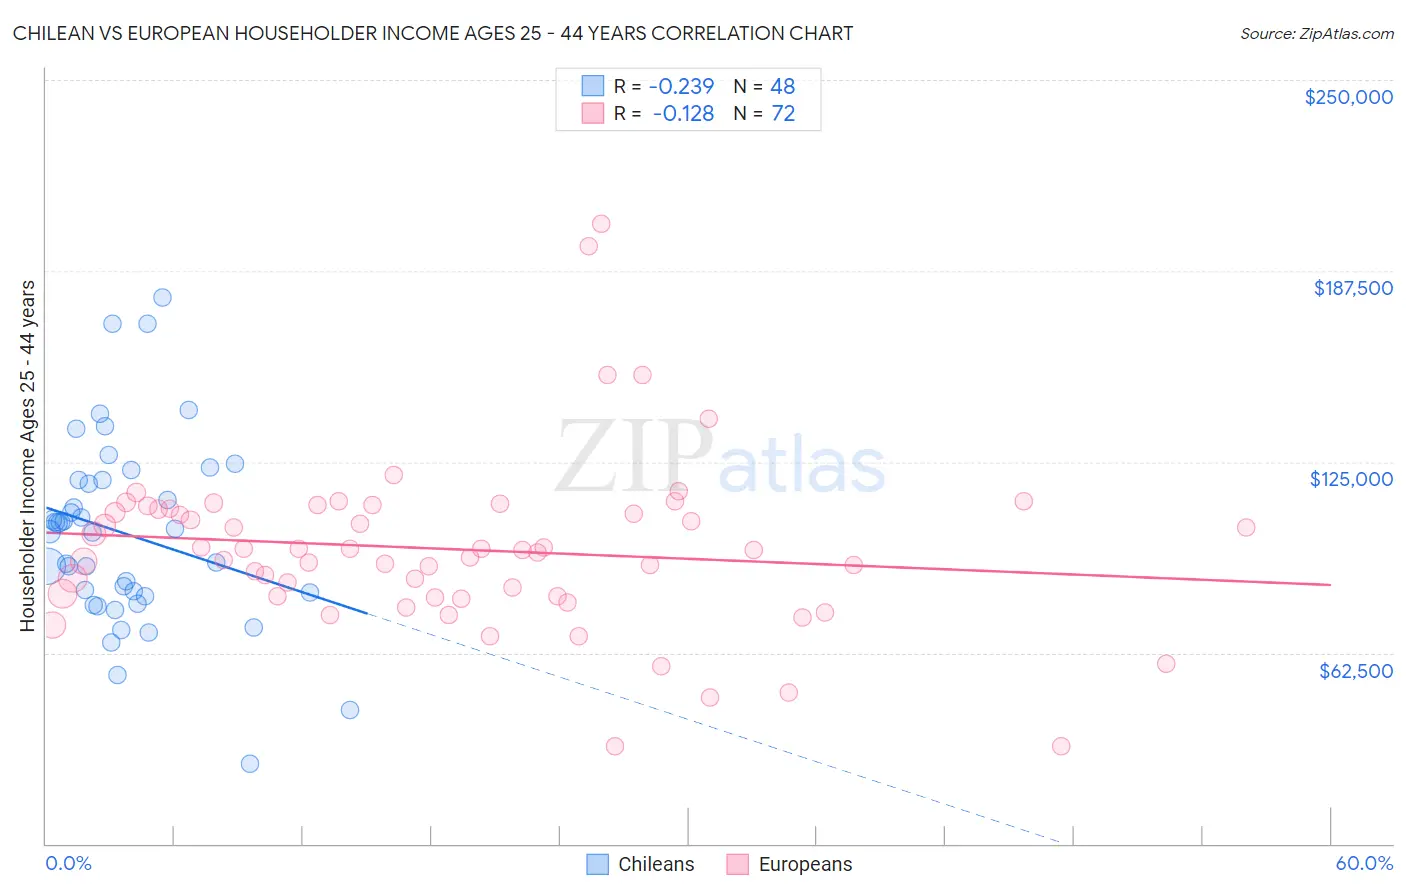 Chilean vs European Householder Income Ages 25 - 44 years